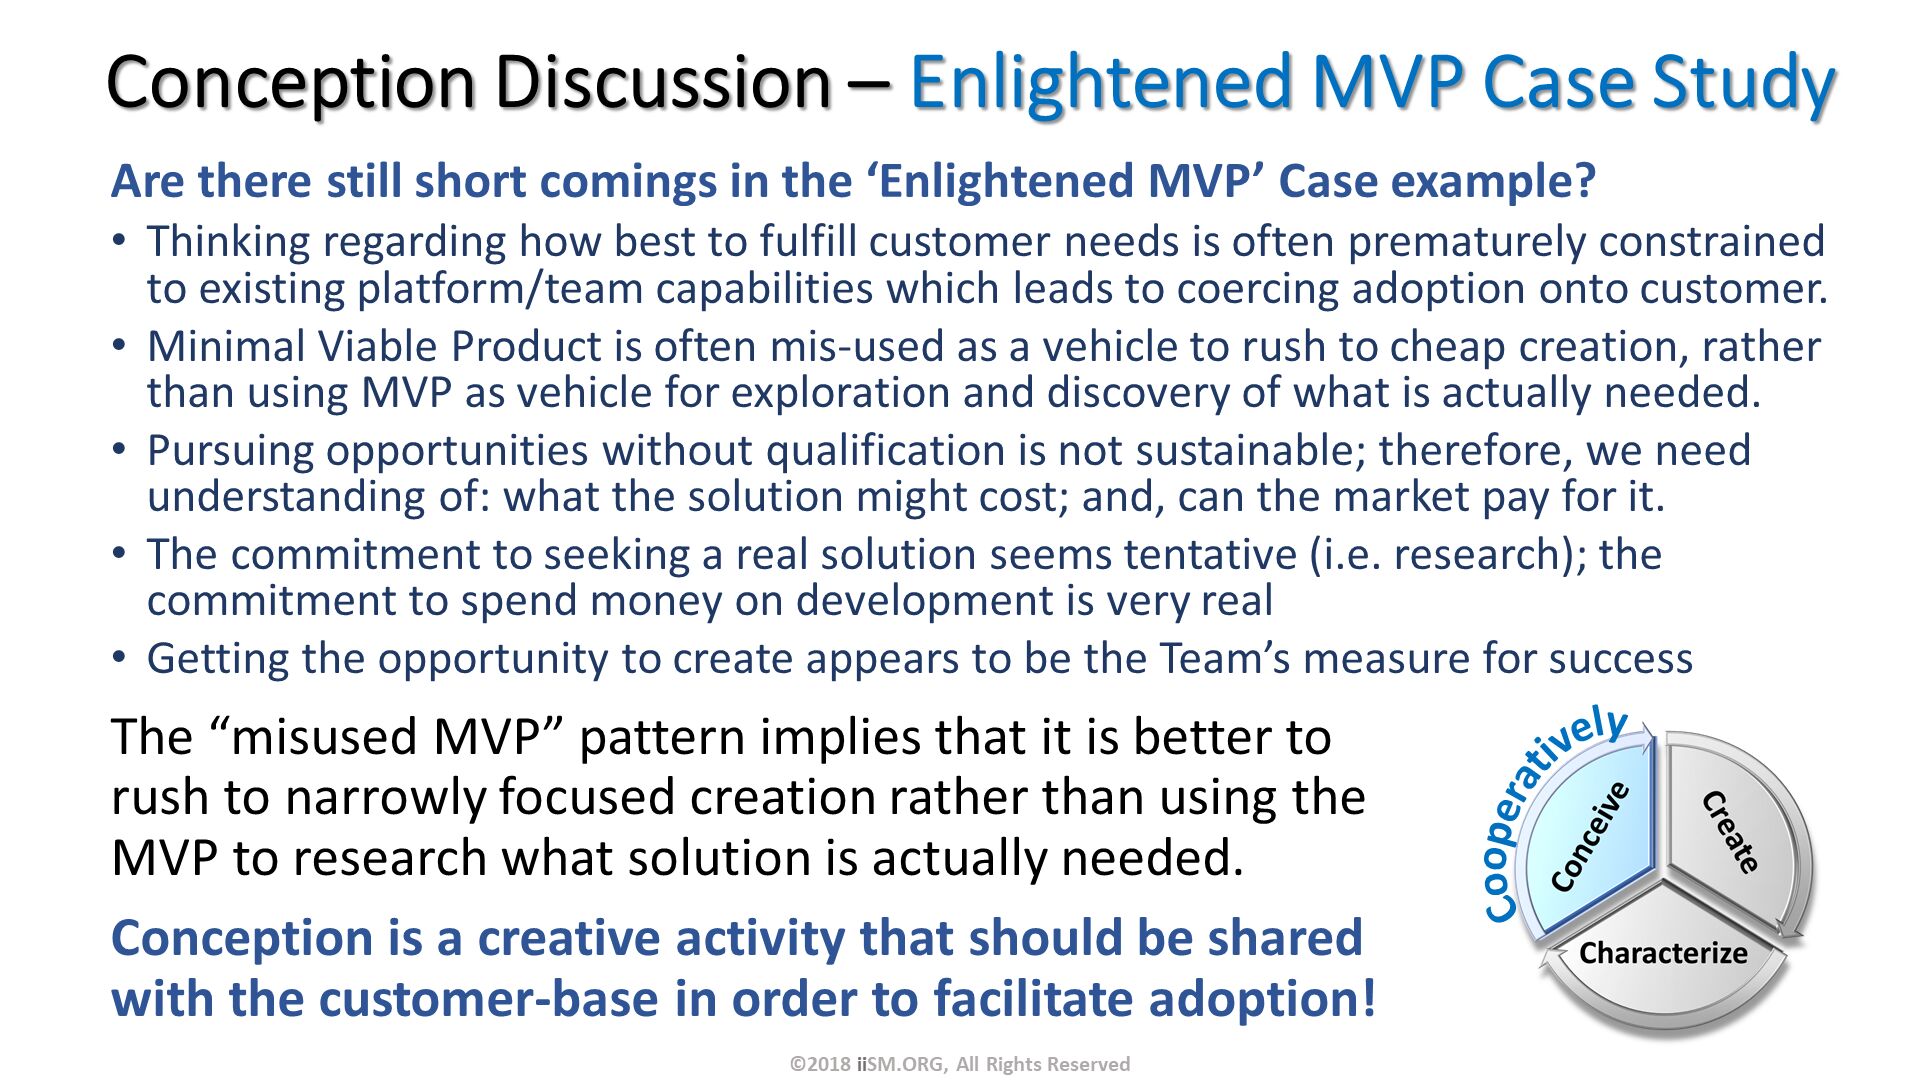 Are there still short comings in the ‘Enlightened MVP’ Case example?
Thinking regarding how best to fulfill customer needs is often prematurely constrained to existing platform/team capabilities which leads to coercing adoption onto customer.  
Minimal Viable Product is often mis-used as a vehicle to rush to cheap creation, rather than using MVP as vehicle for exploration and discovery of what is actually needed.
Pursuing opportunities without qualification is not sustainable; therefore, we need understanding of: what the solution might cost; and, can the market pay for it.
The commitment to seeking a real solution seems tentative (i.e. research); the commitment to spend money on development is very real
Getting the opportunity to create appears to be the Team’s measure for success. Conception Discussion – Enlightened MVP Case Study. The “misused MVP” pattern implies that it is better to rush to narrowly focused creation rather than using the MVP to research what solution is actually needed.
Conception is a creative activity that should be shared with the customer-base in order to facilitate adoption!. ©2018 iiSM.ORG, All Rights Reserved. Cooperatively. 